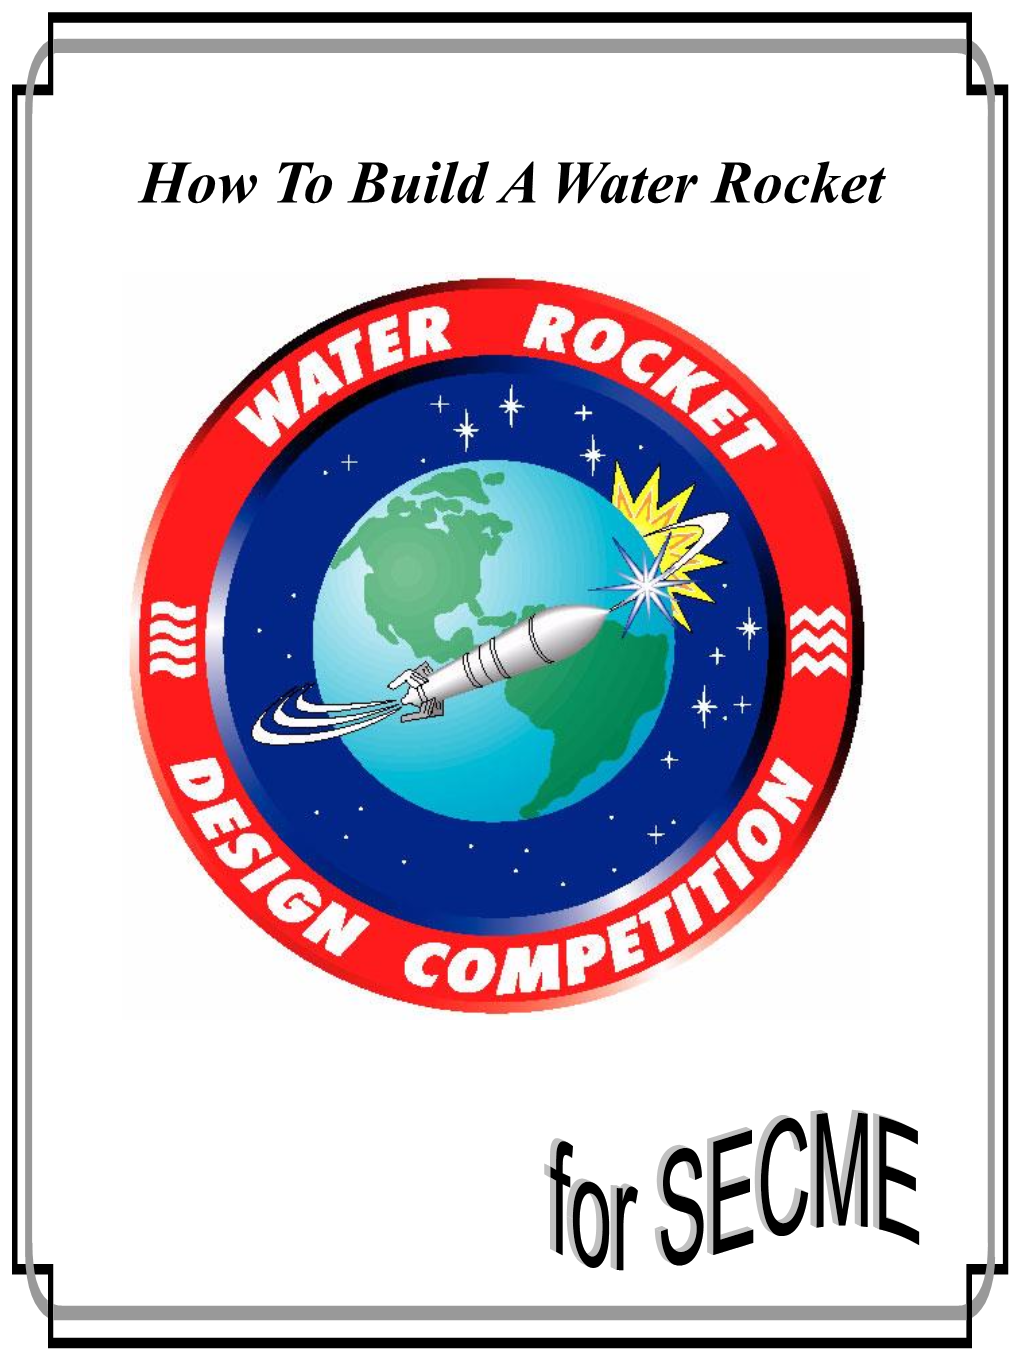 On Water Rocket Construction